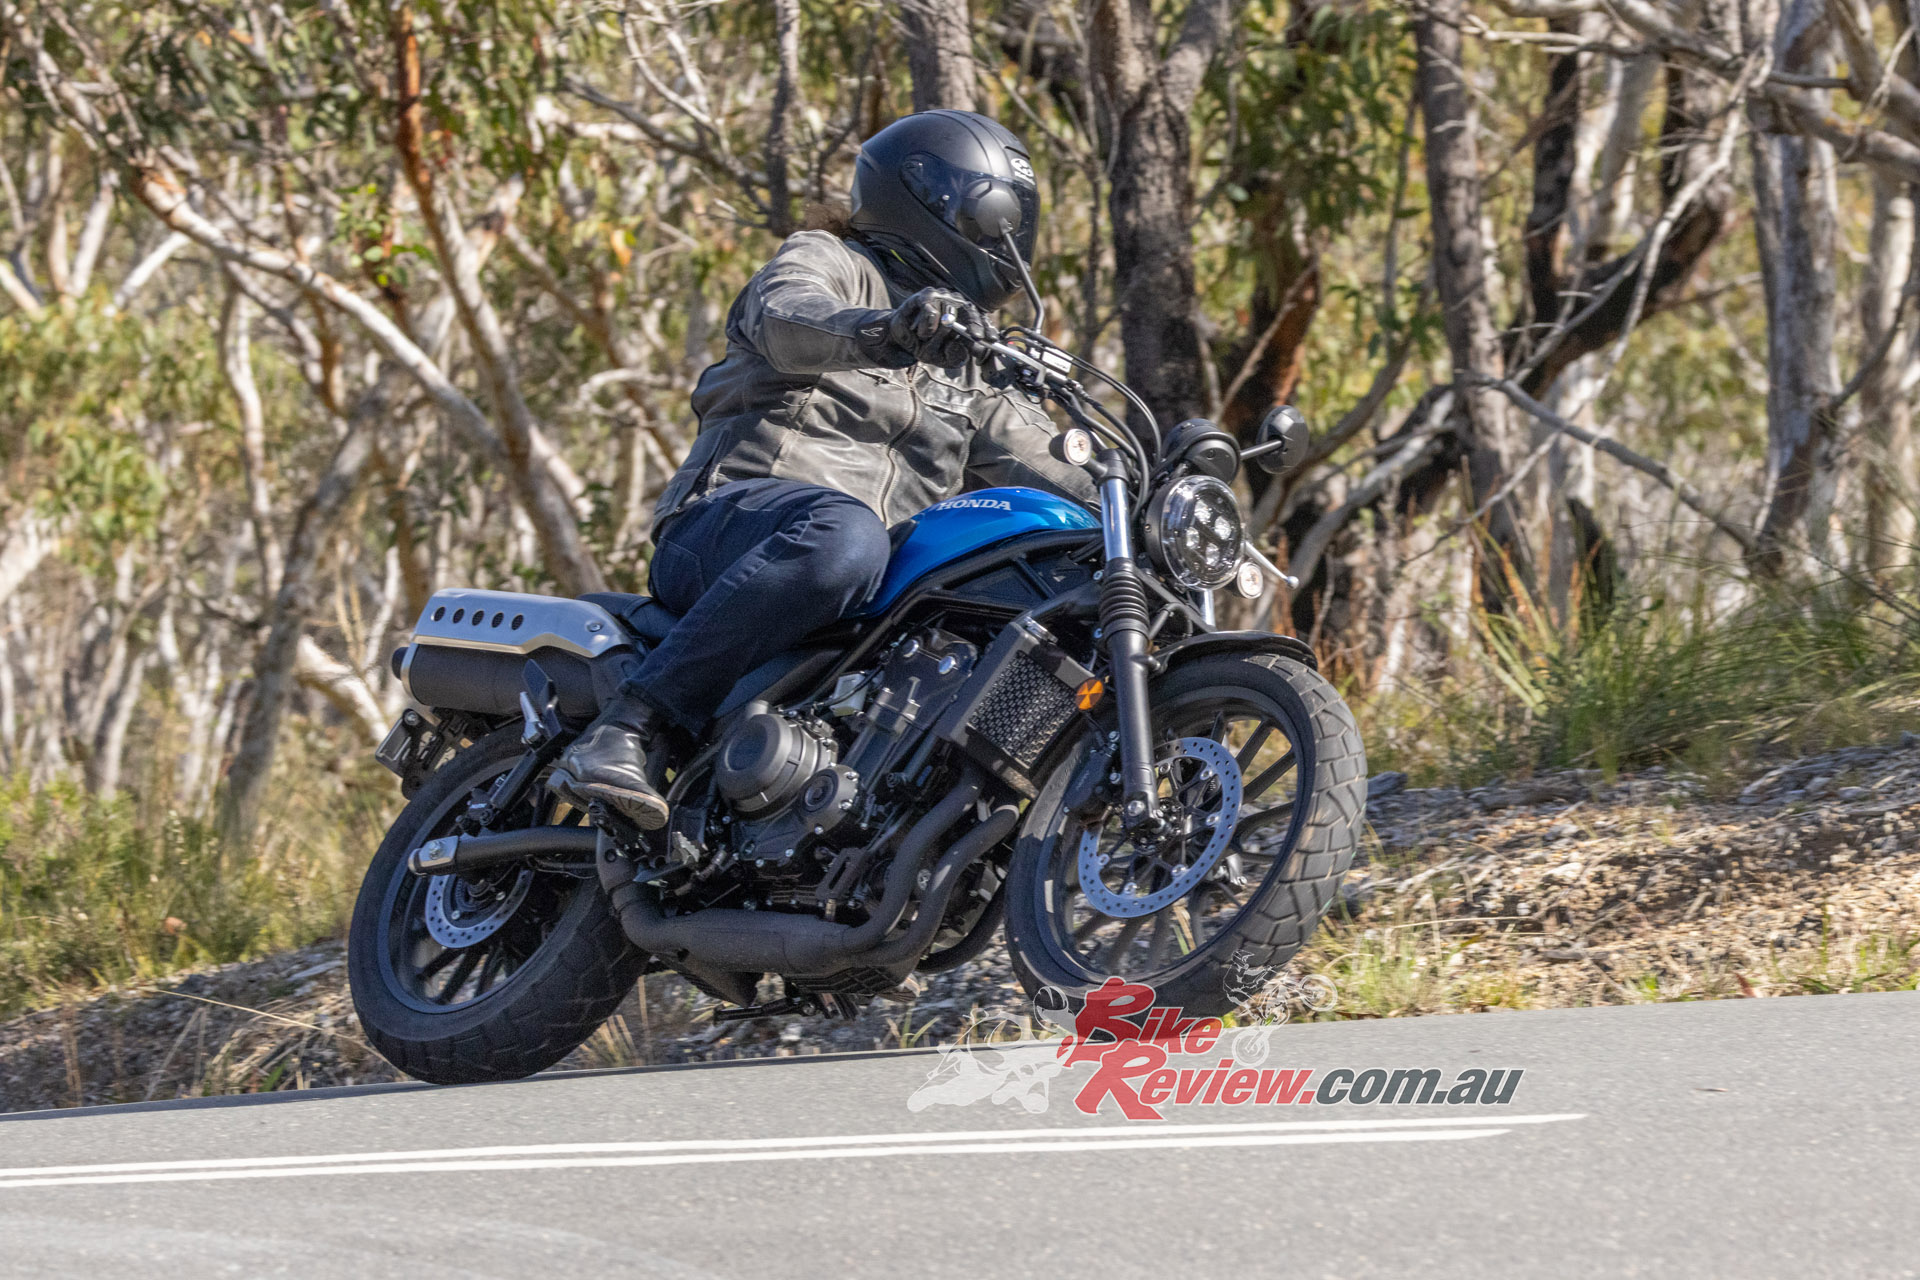 It is fitted with a retro-style two-into-one, an exhaust that you either love or hate. I've heard both opinions while out riding, with some loving the high-set style while others hate it and laugh at the poor pillion rider's inner thigh.